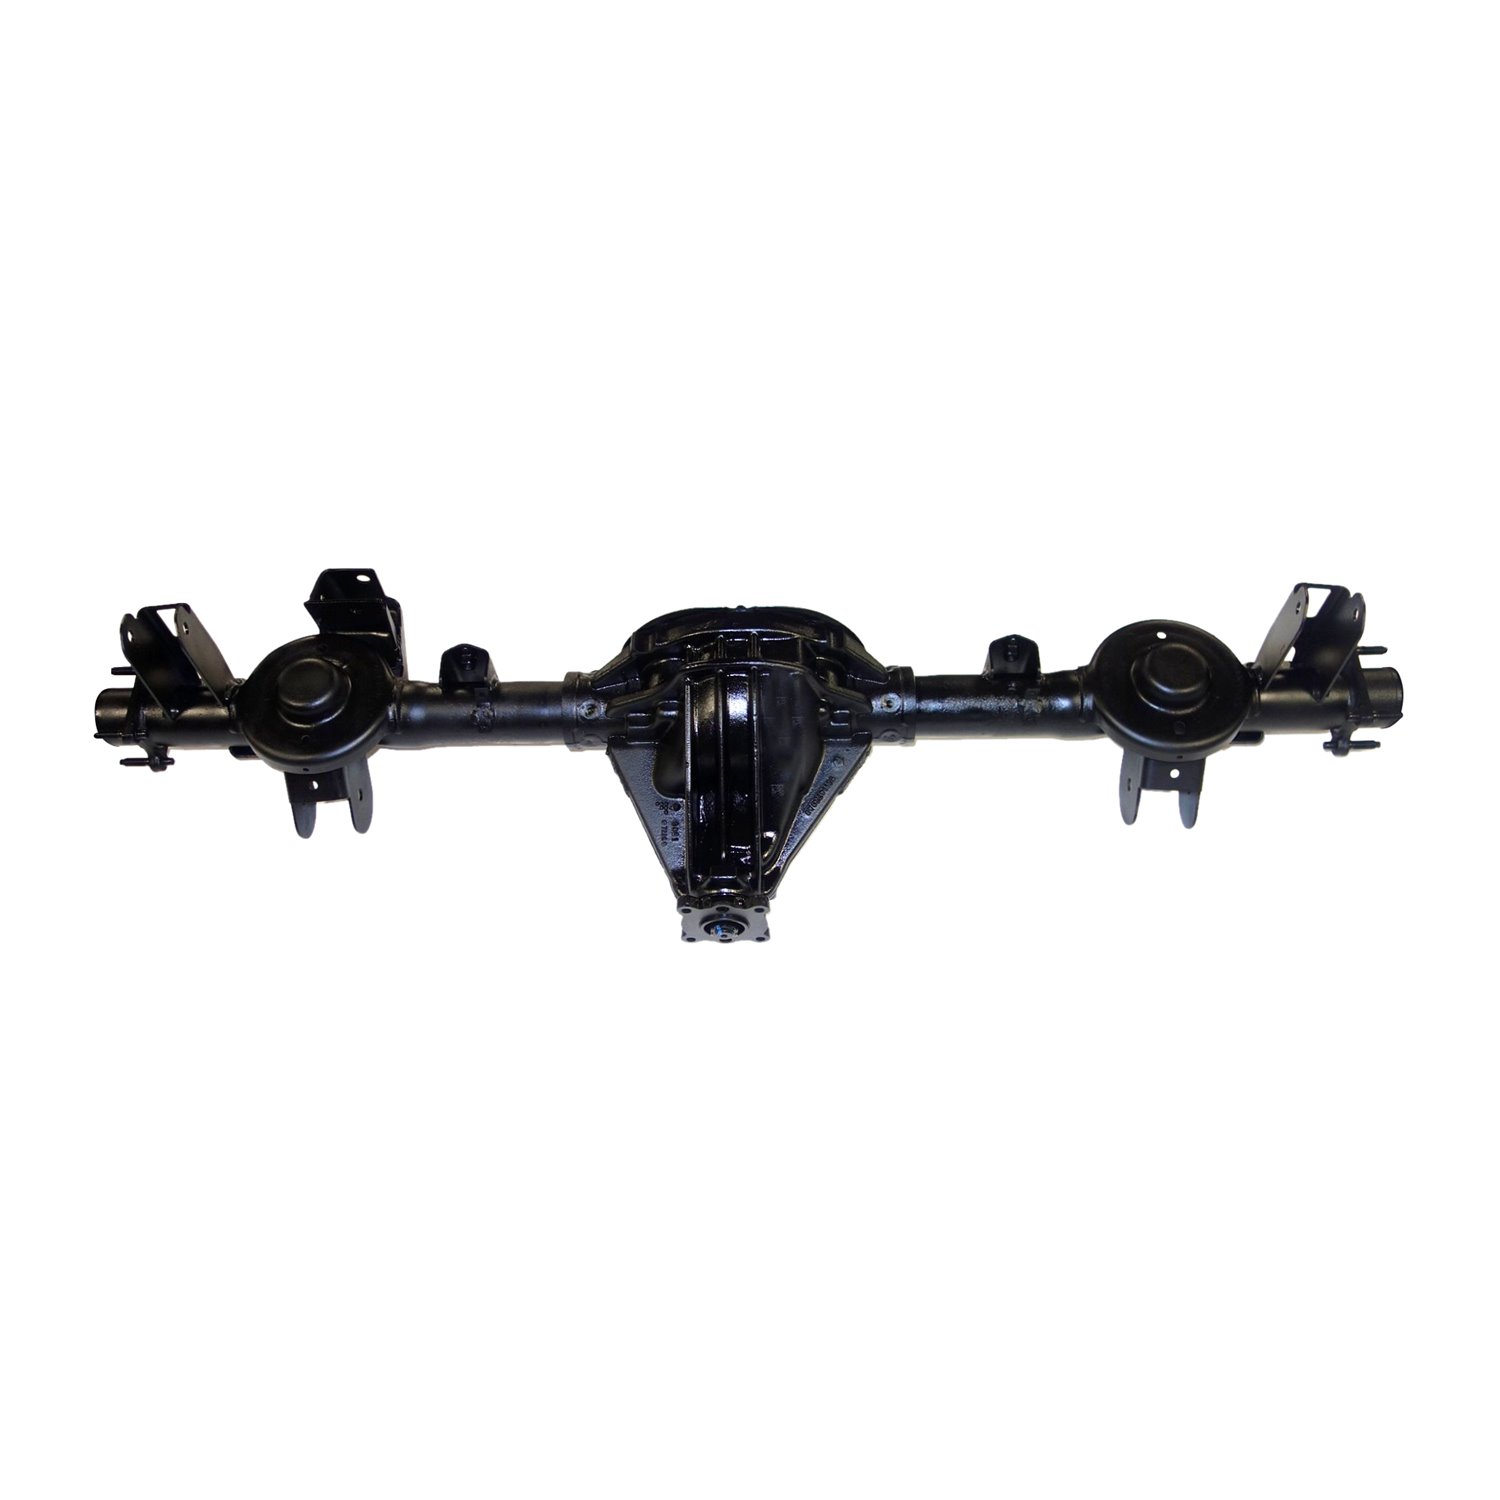 Remanufactured Axle Assy for Chy 8.25" 03-04 Liberty 4.11 w/ ABS, CV Driveshaft